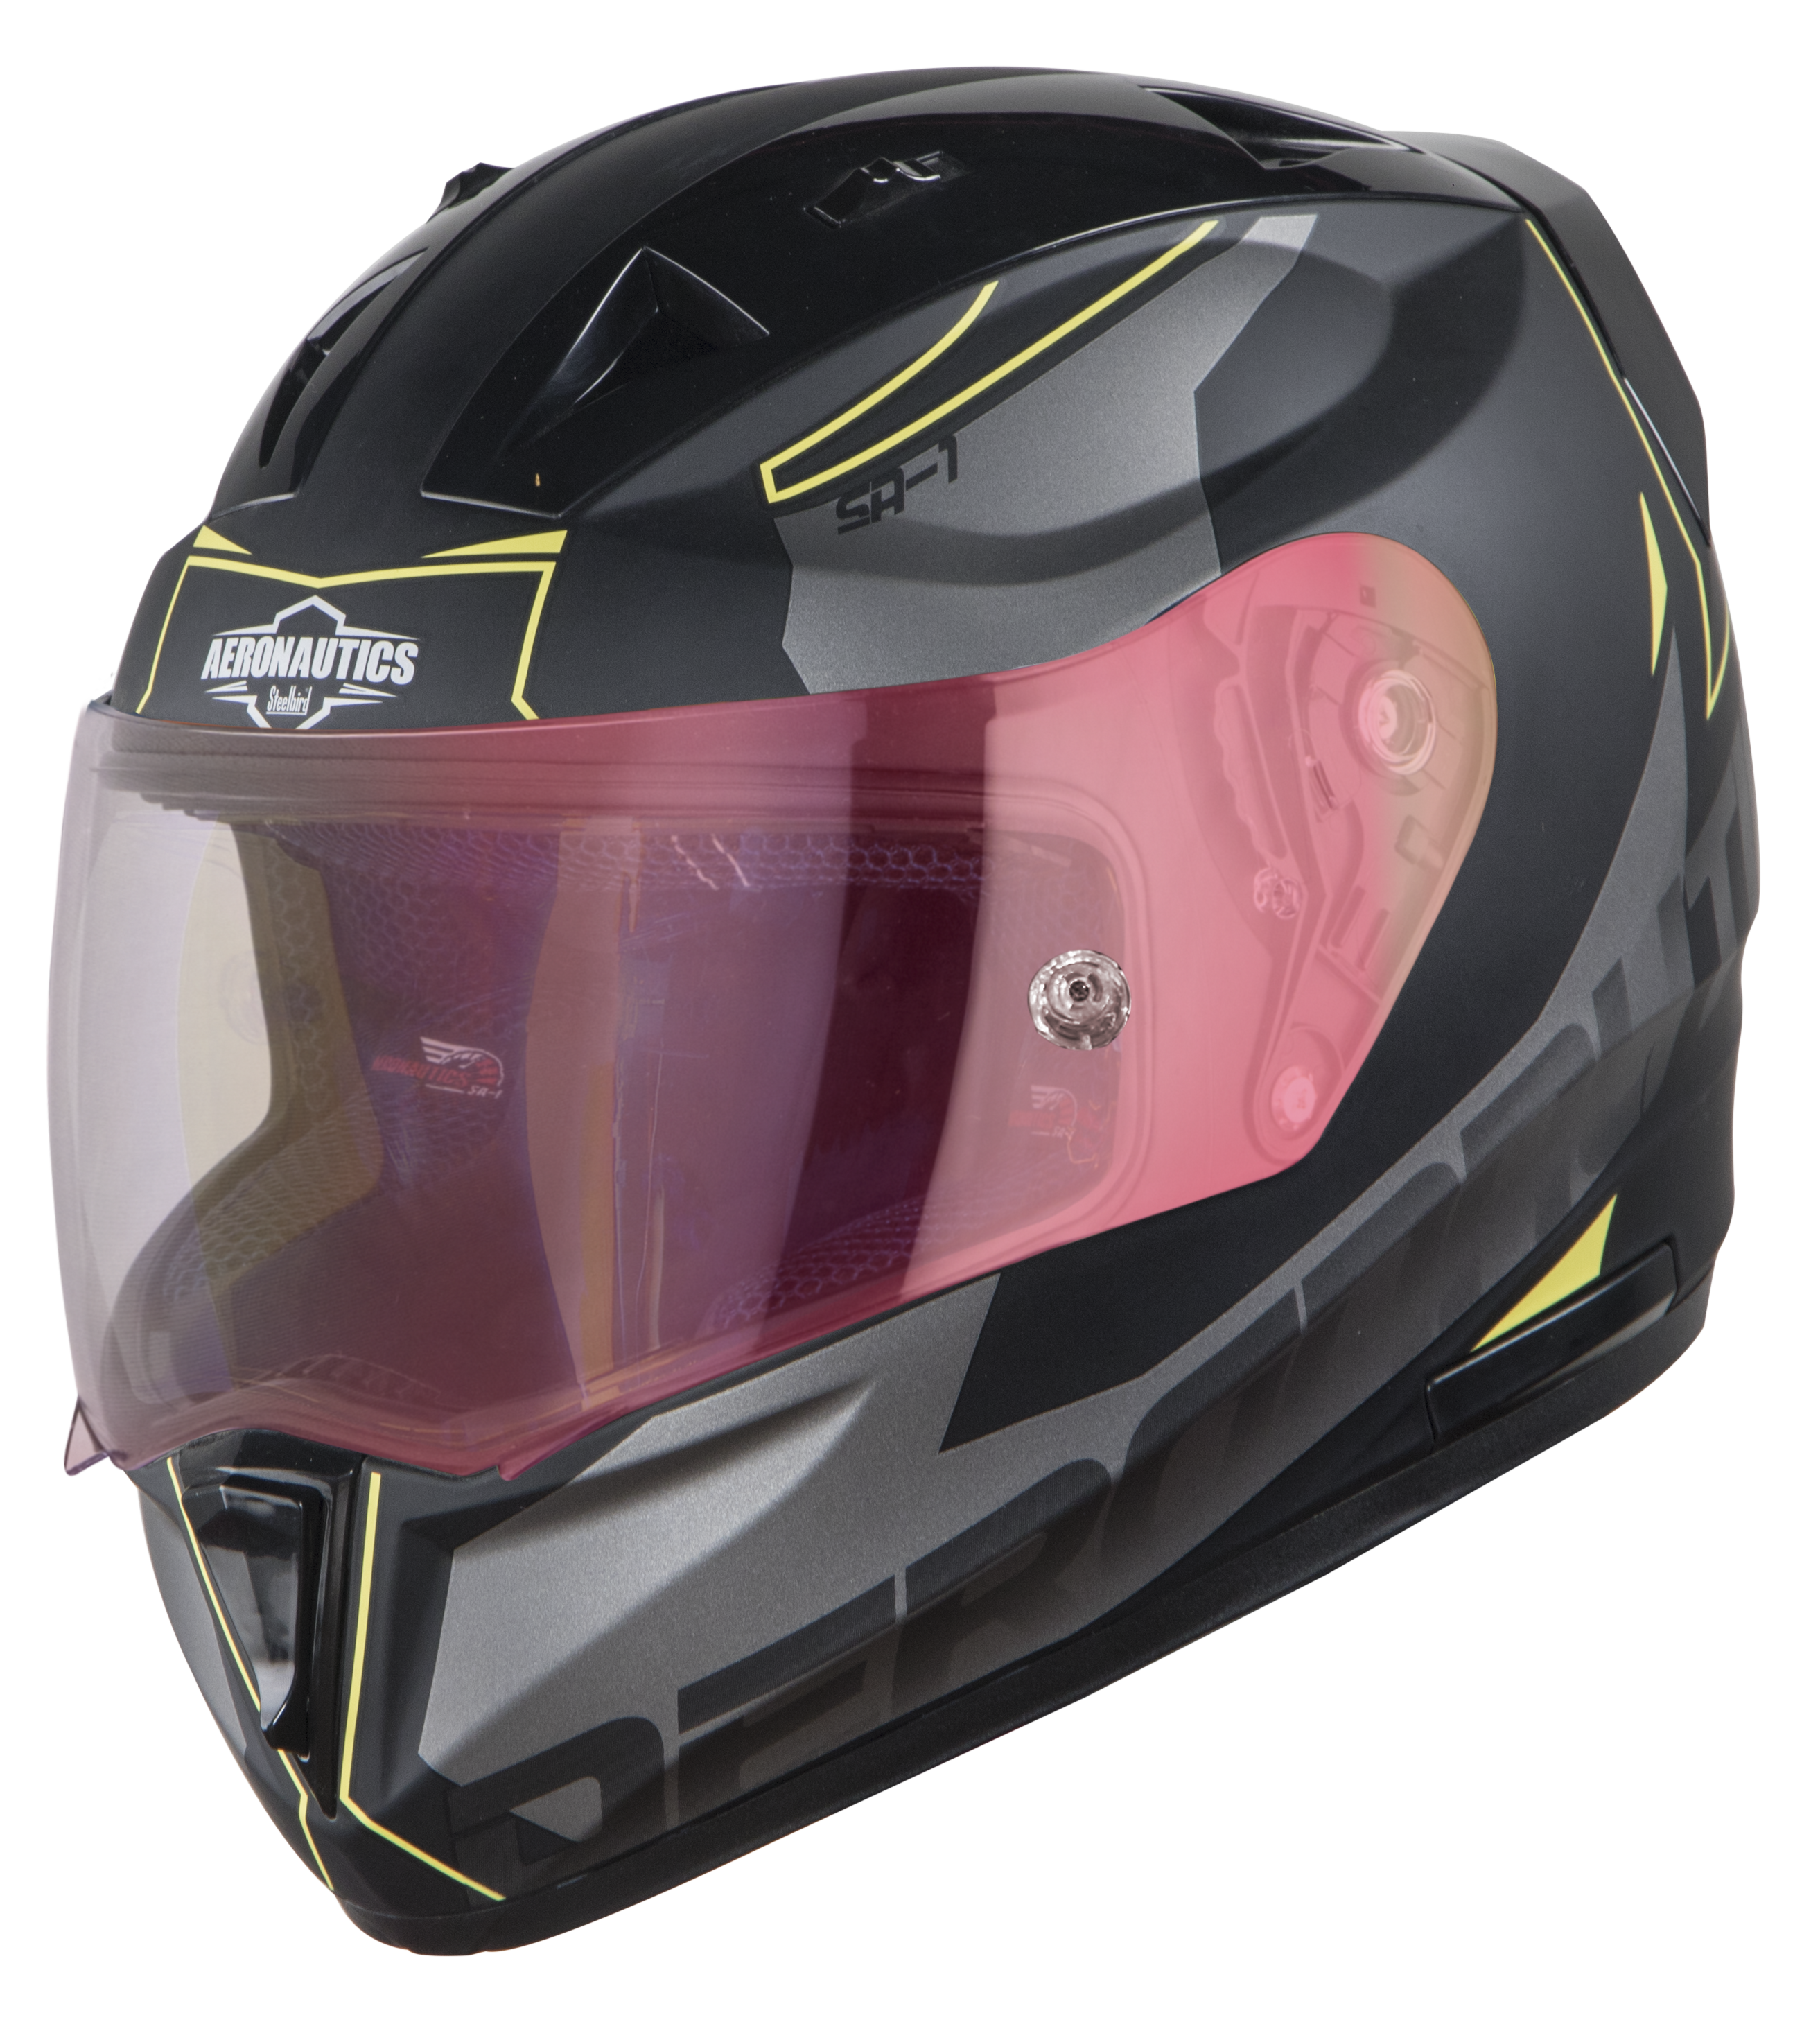 SA-1 RTW Mat Black/Yellow With Anti-Fog Shield Gold Night Vision Visor(Fitted With Clear Visor Extra Gold Night Vision Anti-Fog Shield Visor Free)